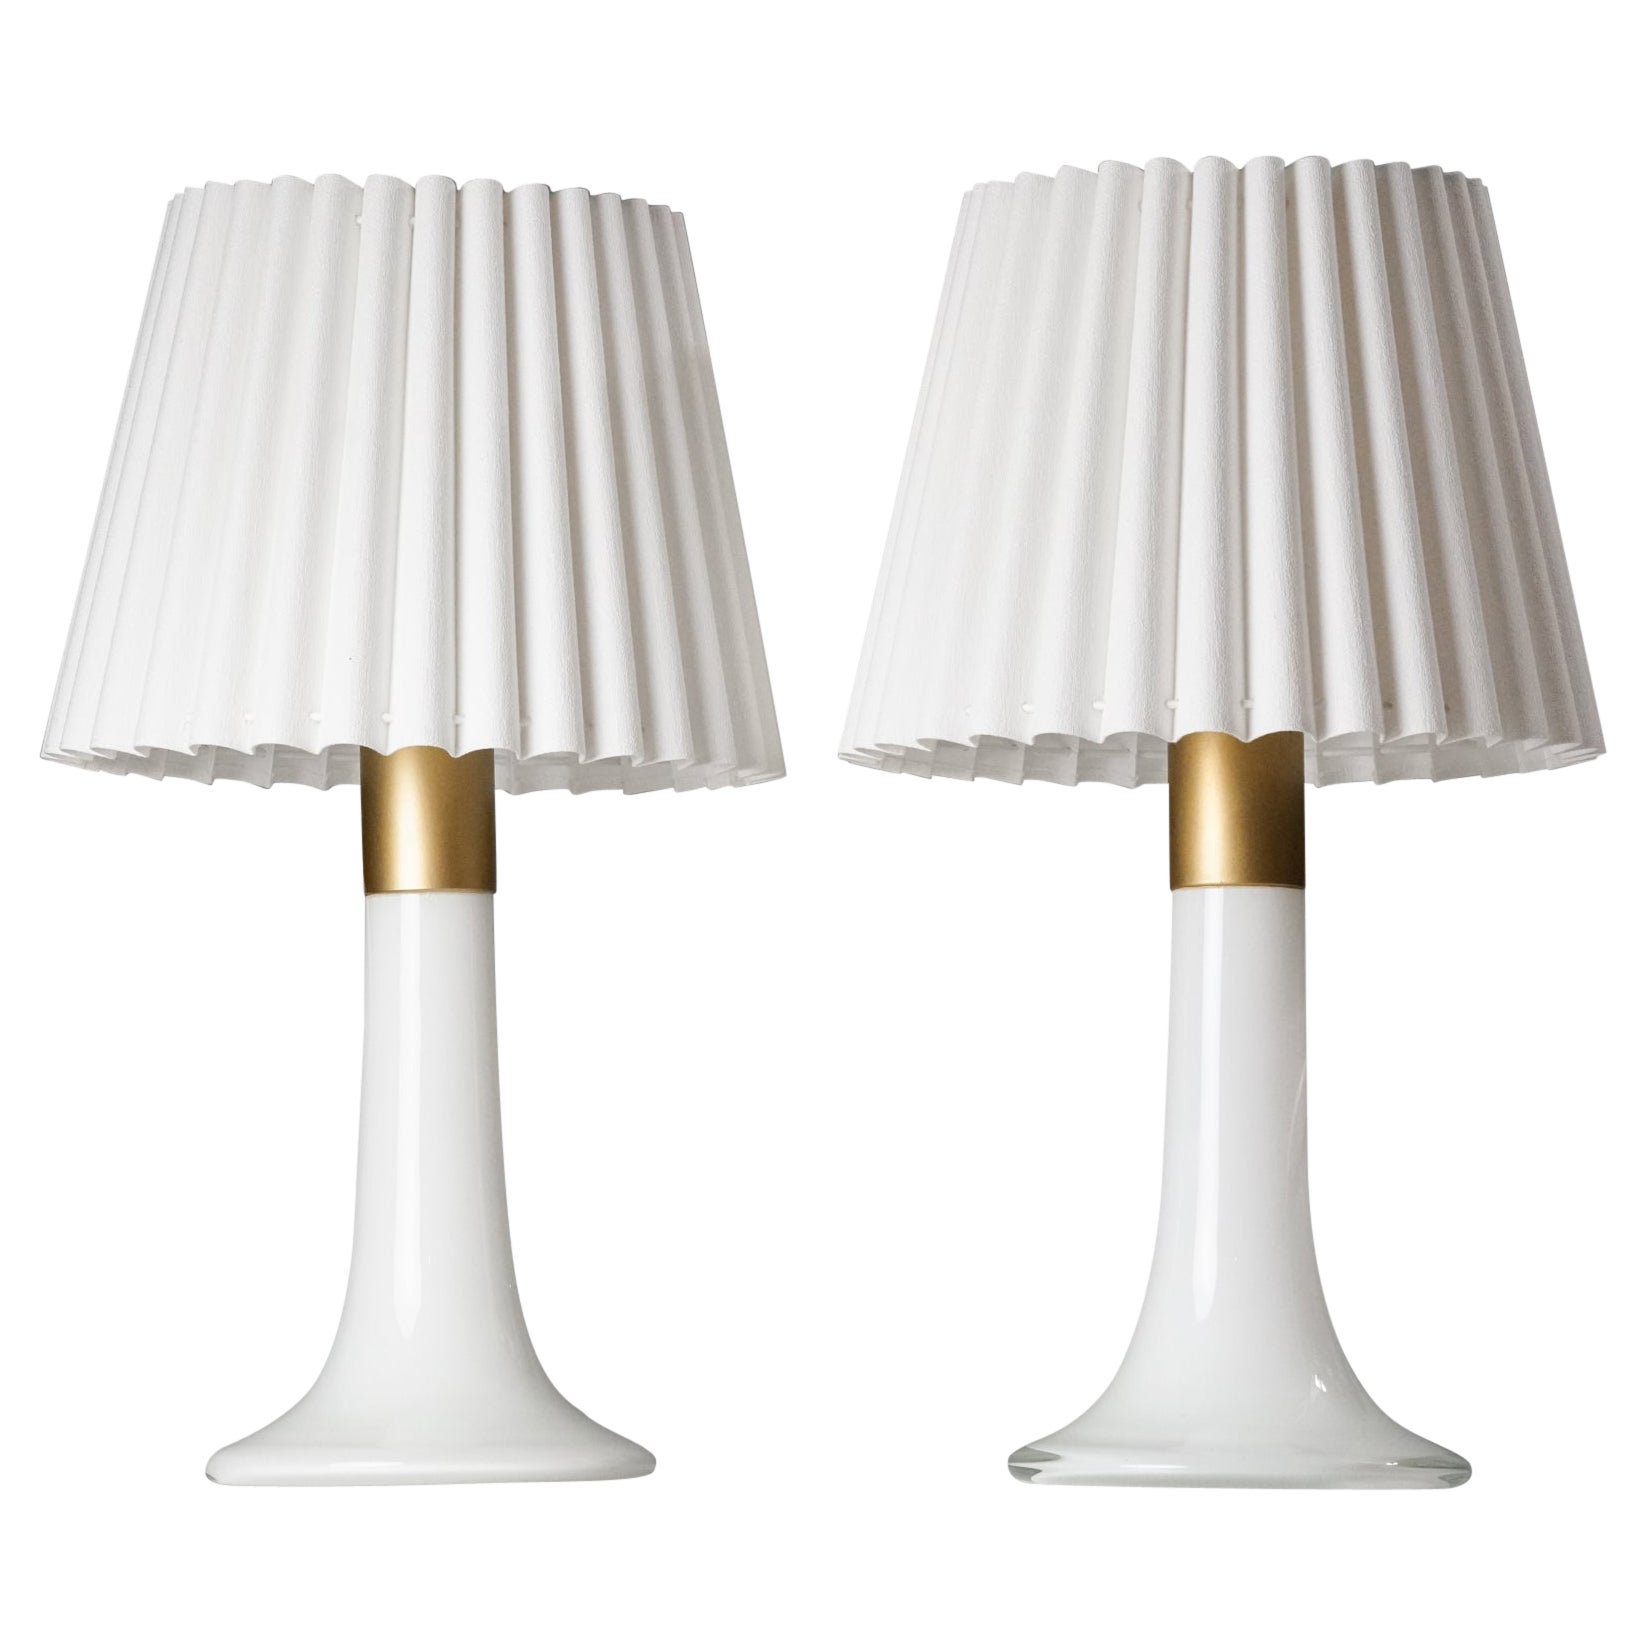 Set of Two Glass Table Lamps, Lisa Johansson-Pape, Orno Oy, 1960s  For Sale